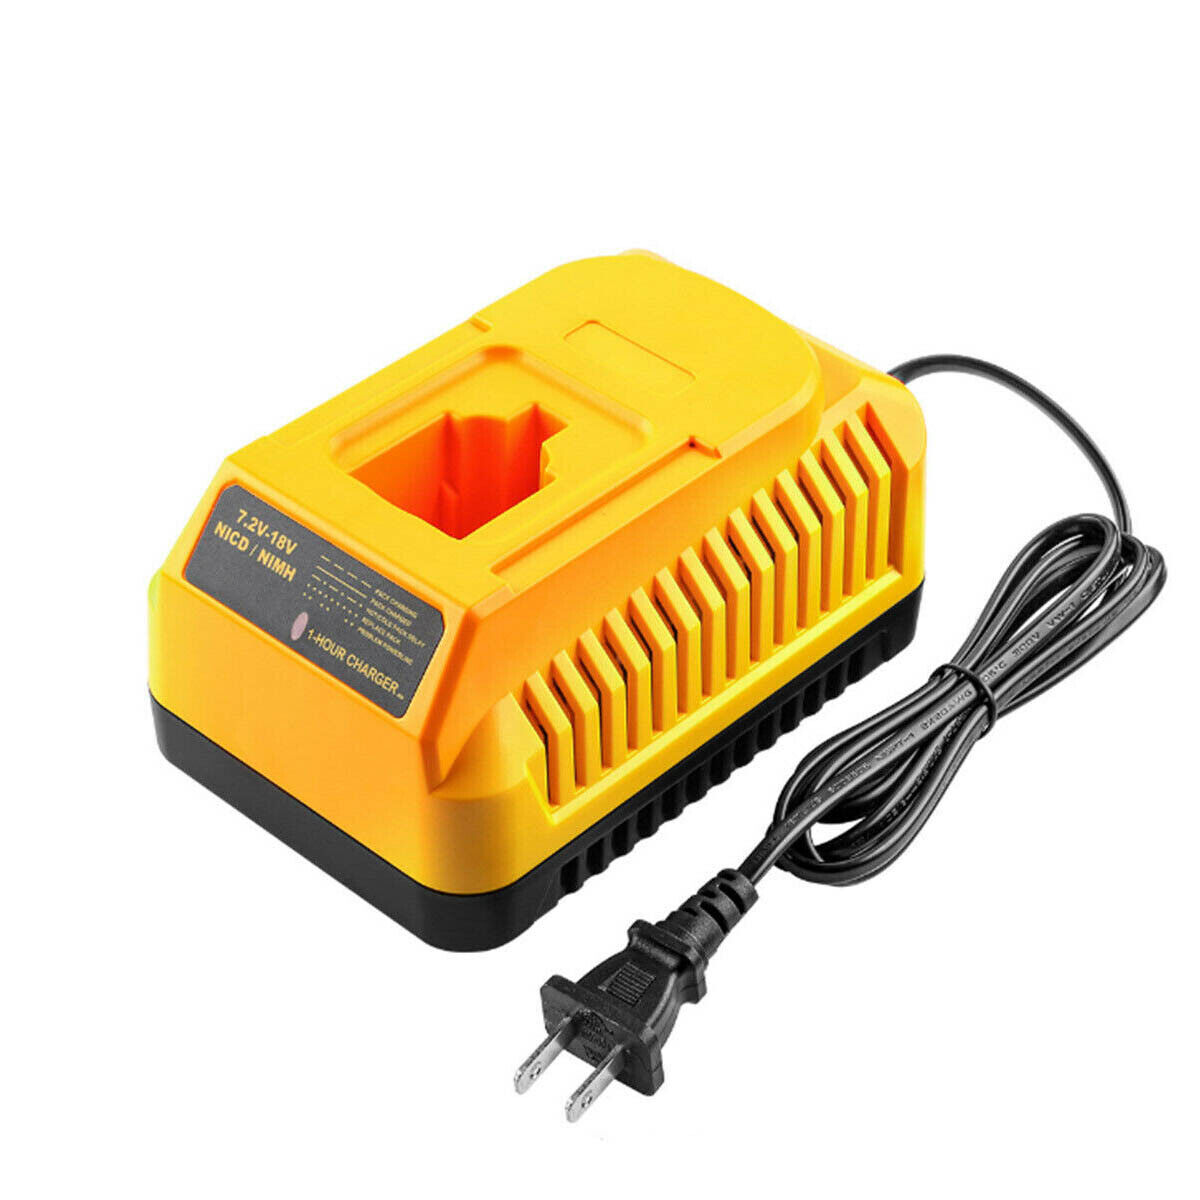 Great Choice Products New Battery Charger For Alemite 340911 12 Volt 12V Nicd Nimh Battery Us Stock